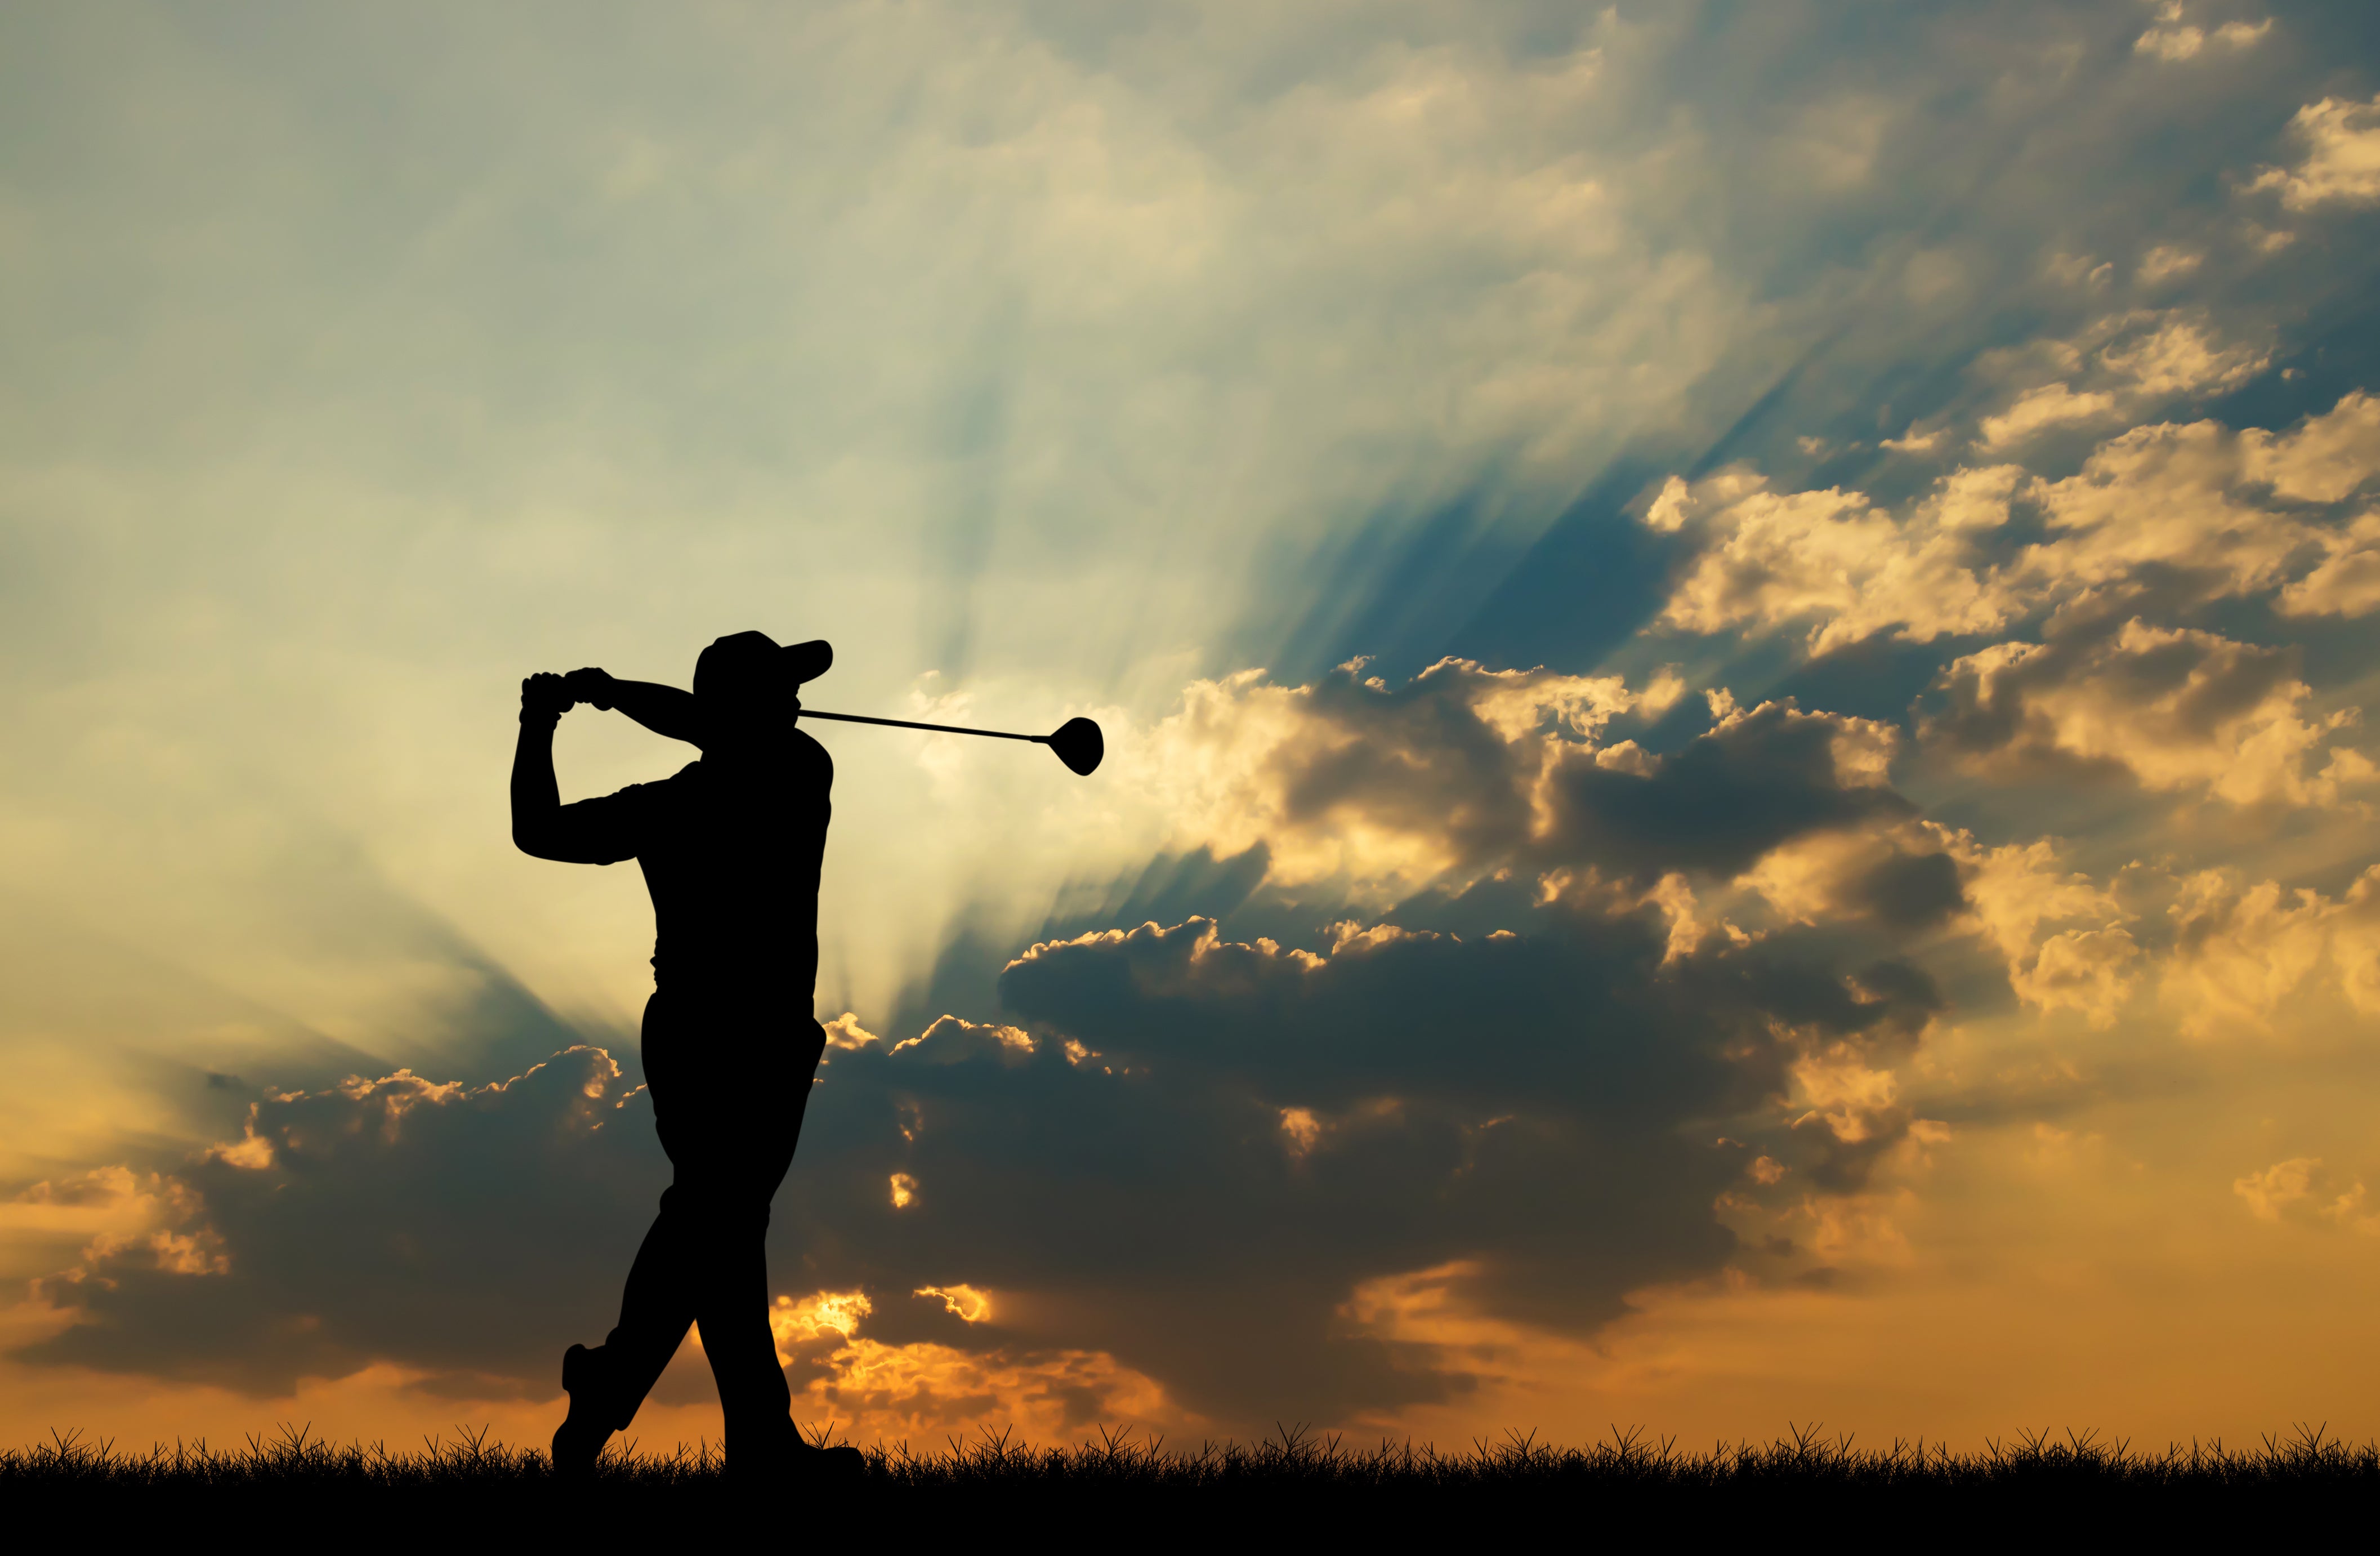 REVEALED: THE TOP THREE ONLINE GOLF COACHES